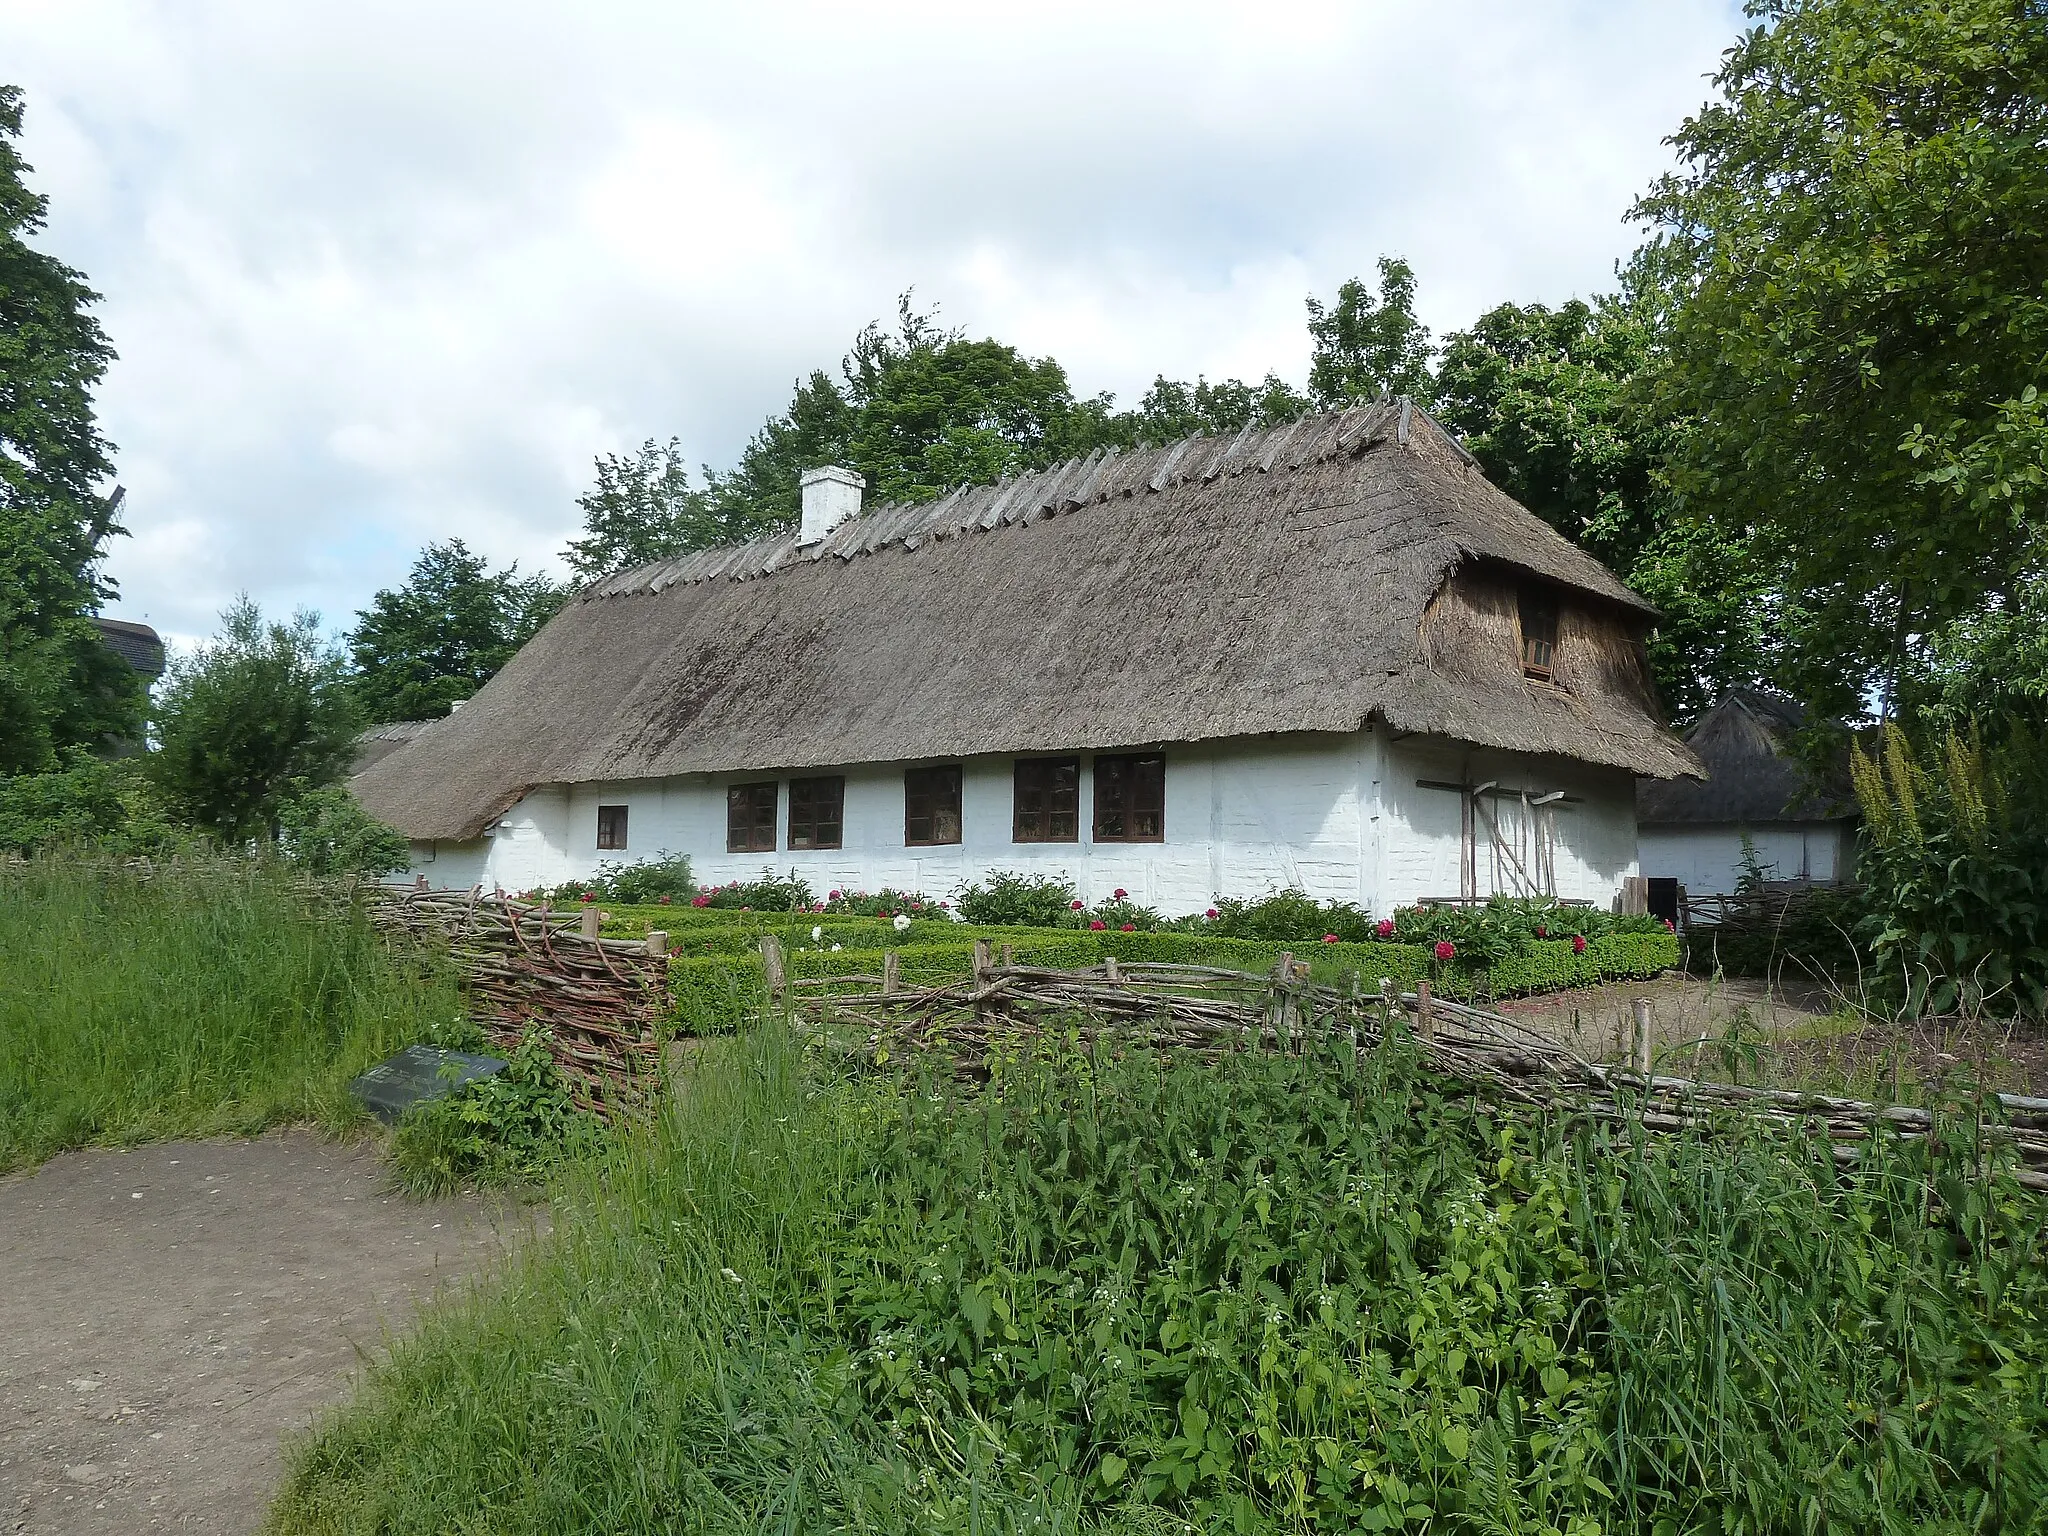 Photo showing: Smallholder house from Dannemare, Lolland, now on Frilandsmuseet (the open air museum) north of Copenhagen.